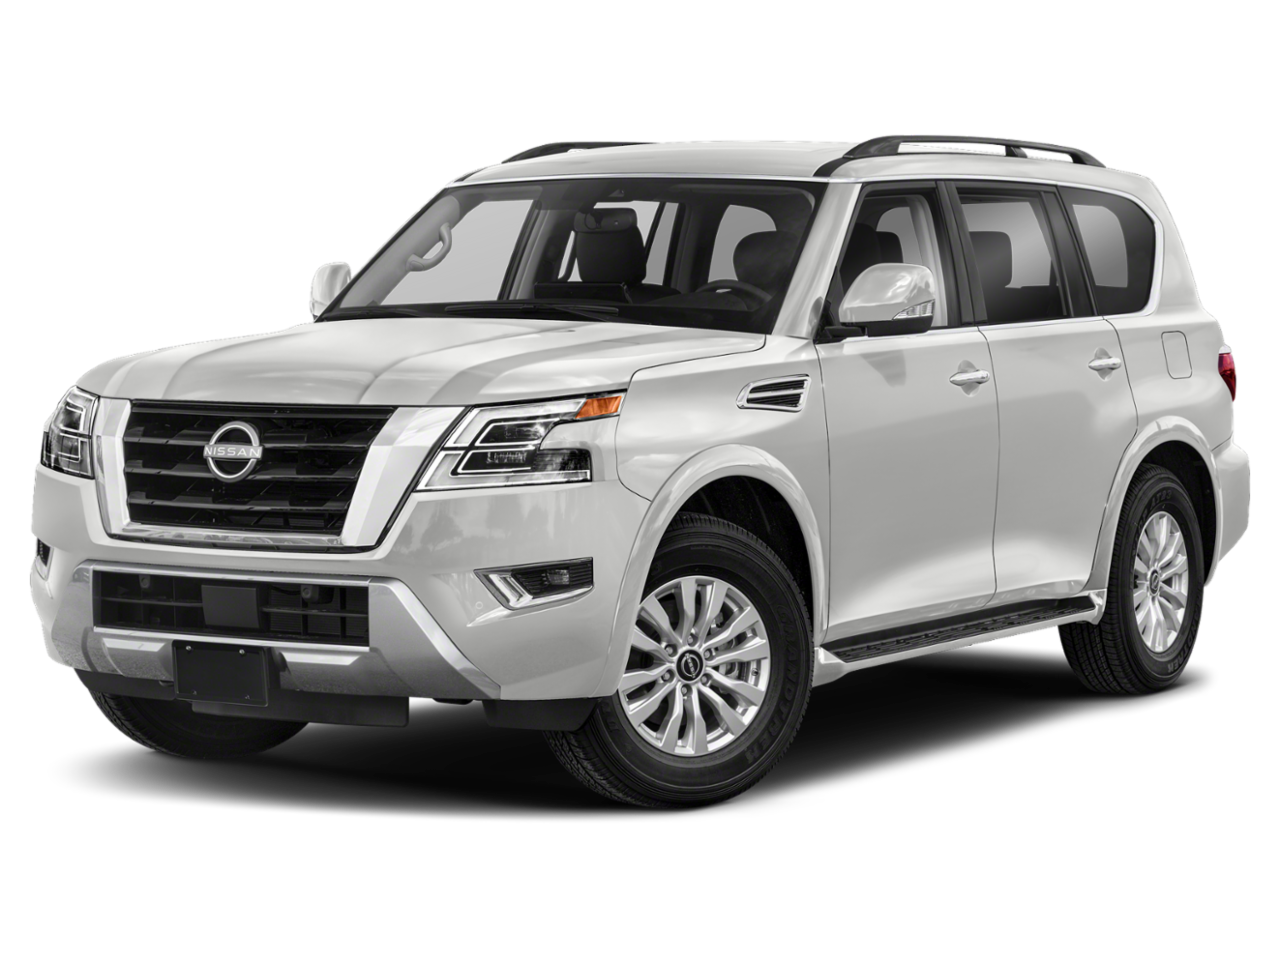 New Nissan Armada from your Greenwood MS dealership, Cannon Nissan of